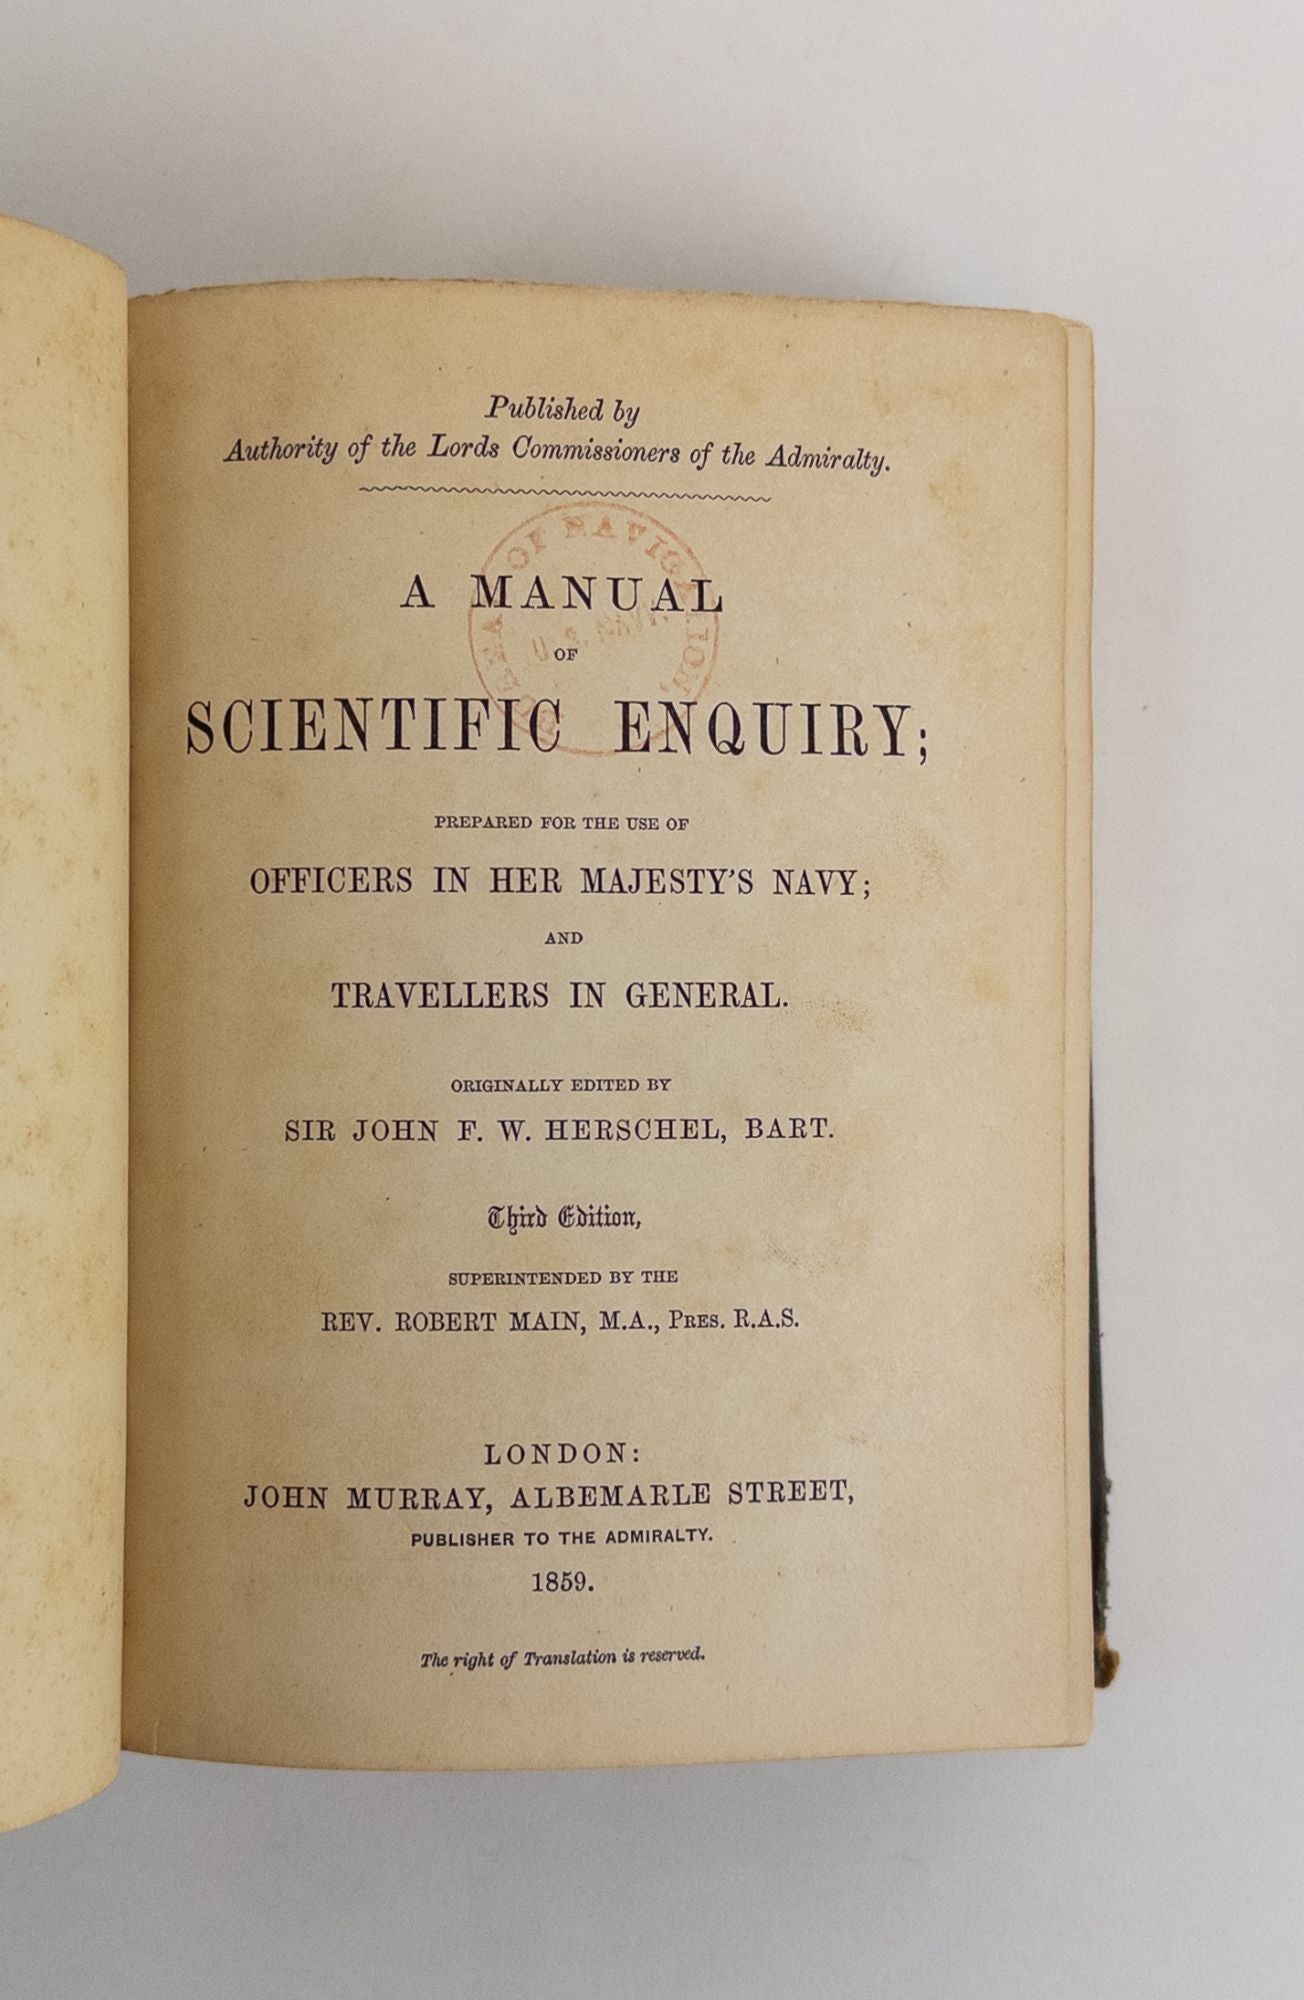 Product Image for A MANUAL OF SCIENTIFIC ENQUIRY; PREPARED FOR THE USE OF OFFICERS IN HER MAJESTY'S NAVY; AND TRAVELERS IN GENERAL